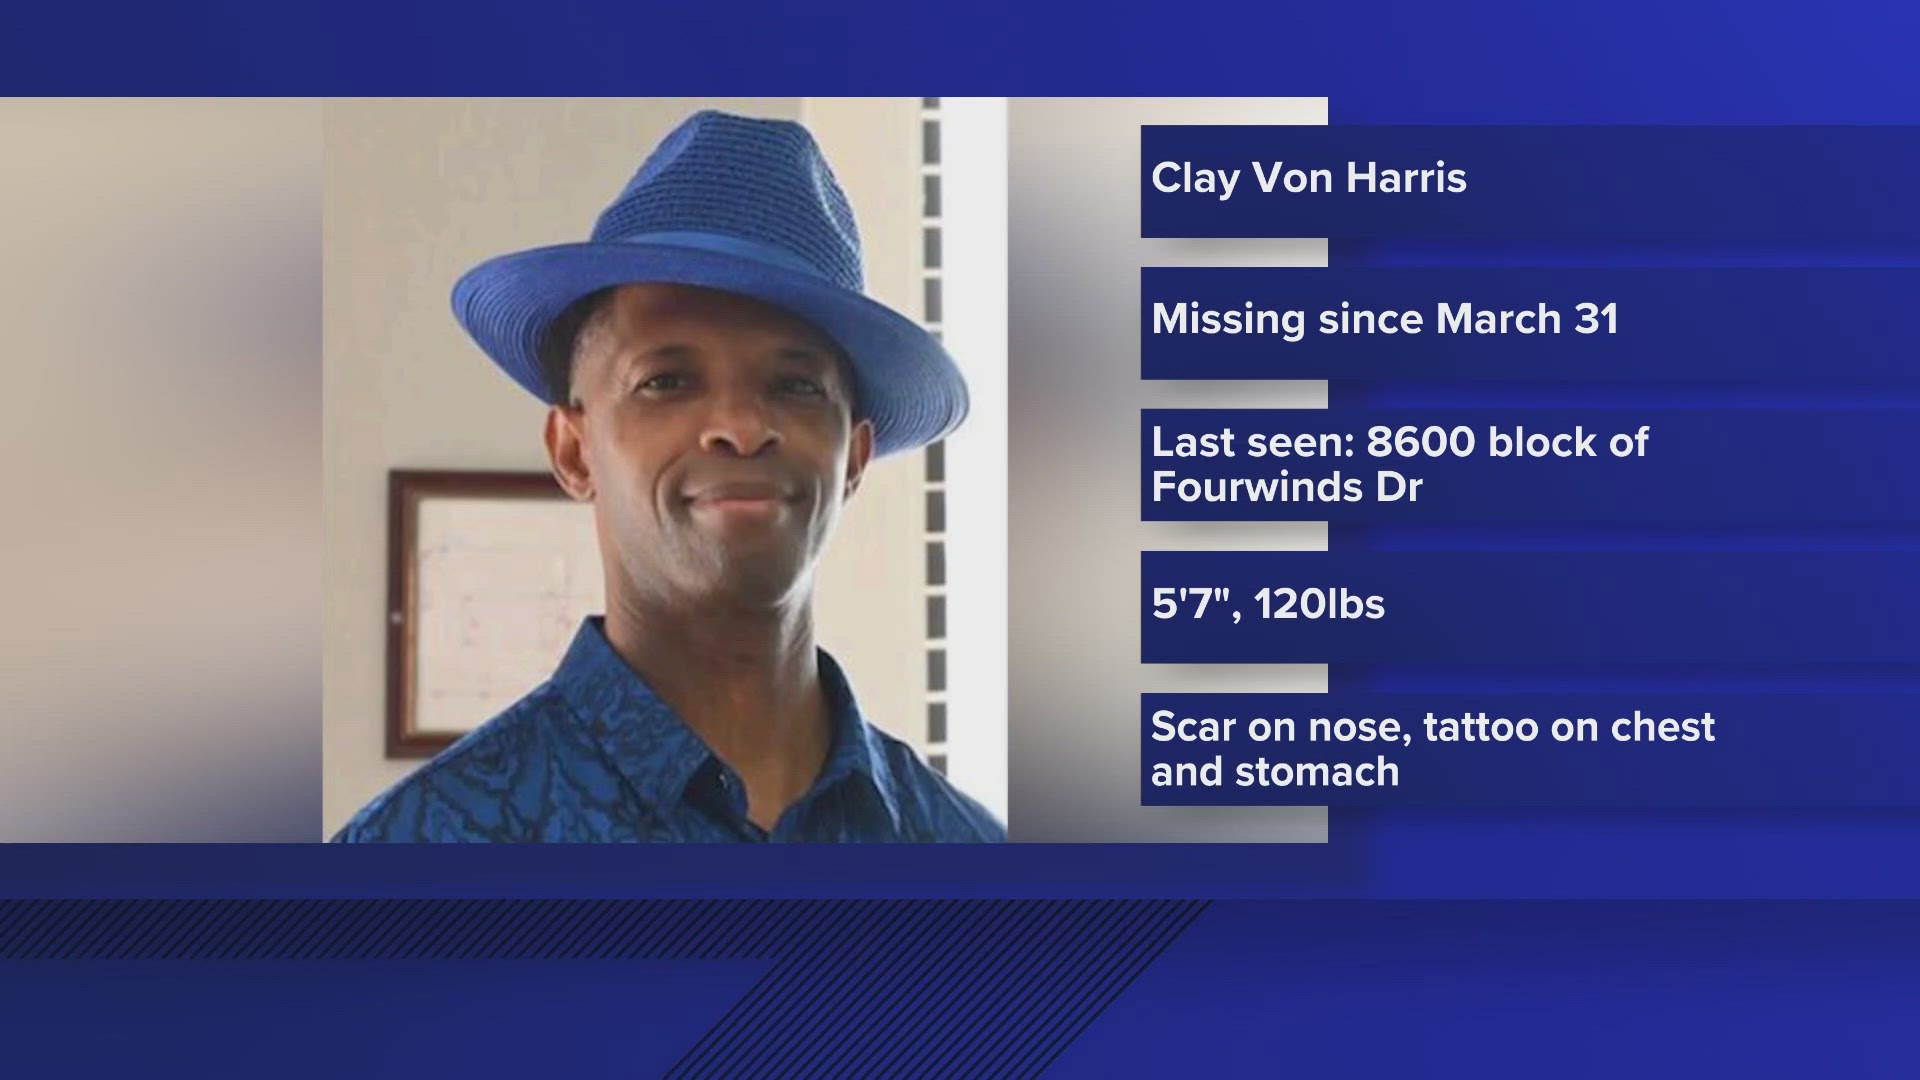 Clay Von Harris was last seen in the Windcrest area. If you have seen him or know where he is, contact the SAPD missing persons unit.